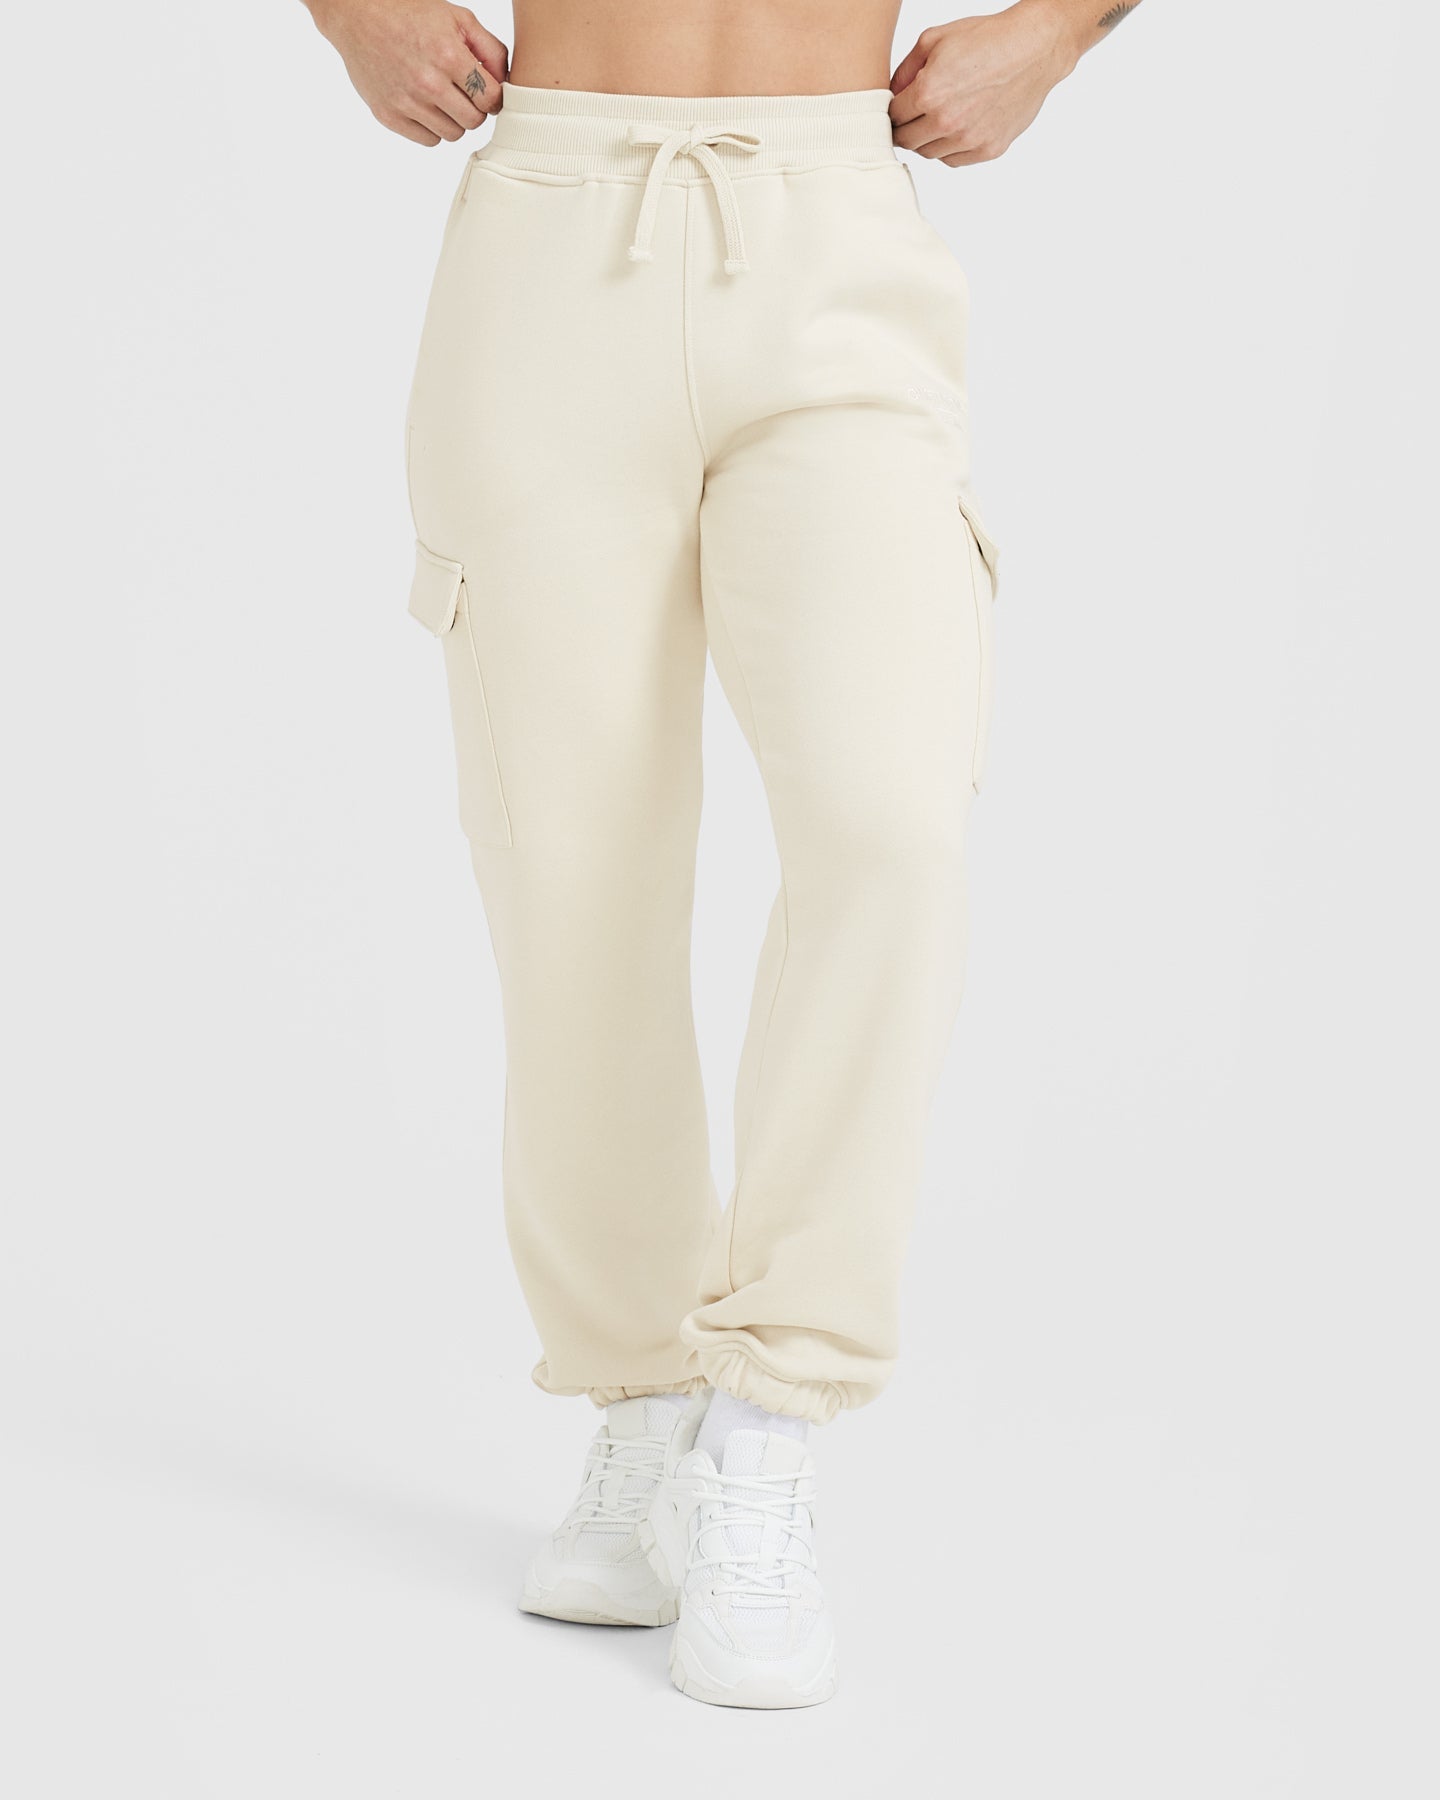 Oner Active All Day Lightweight Cargo Jogger - Sand - XS Regular length -  Athletic apparel